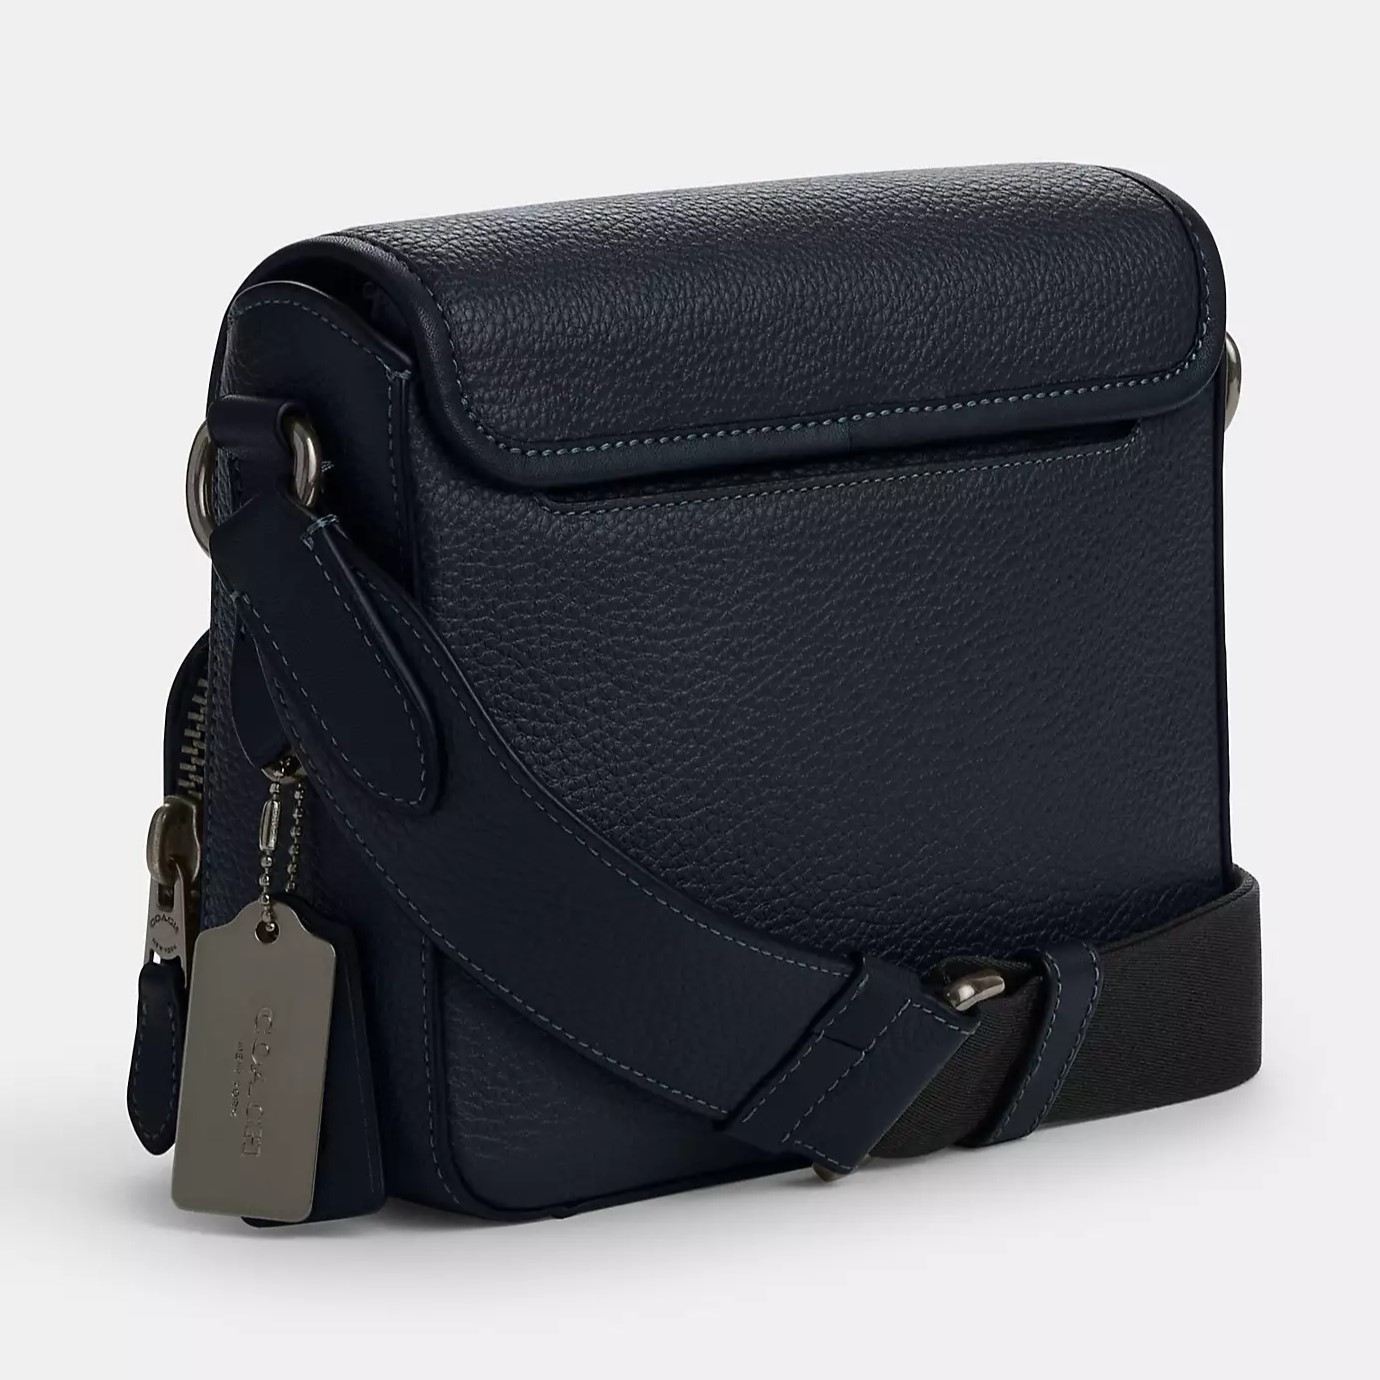 TÚI COACH NAM SULLIVAN FLAP CROSSBODY IN MIDNIGHT NAVY REFINED PEBBLE LEATHER AND SMOOTH CALF LEATHER CN729 4